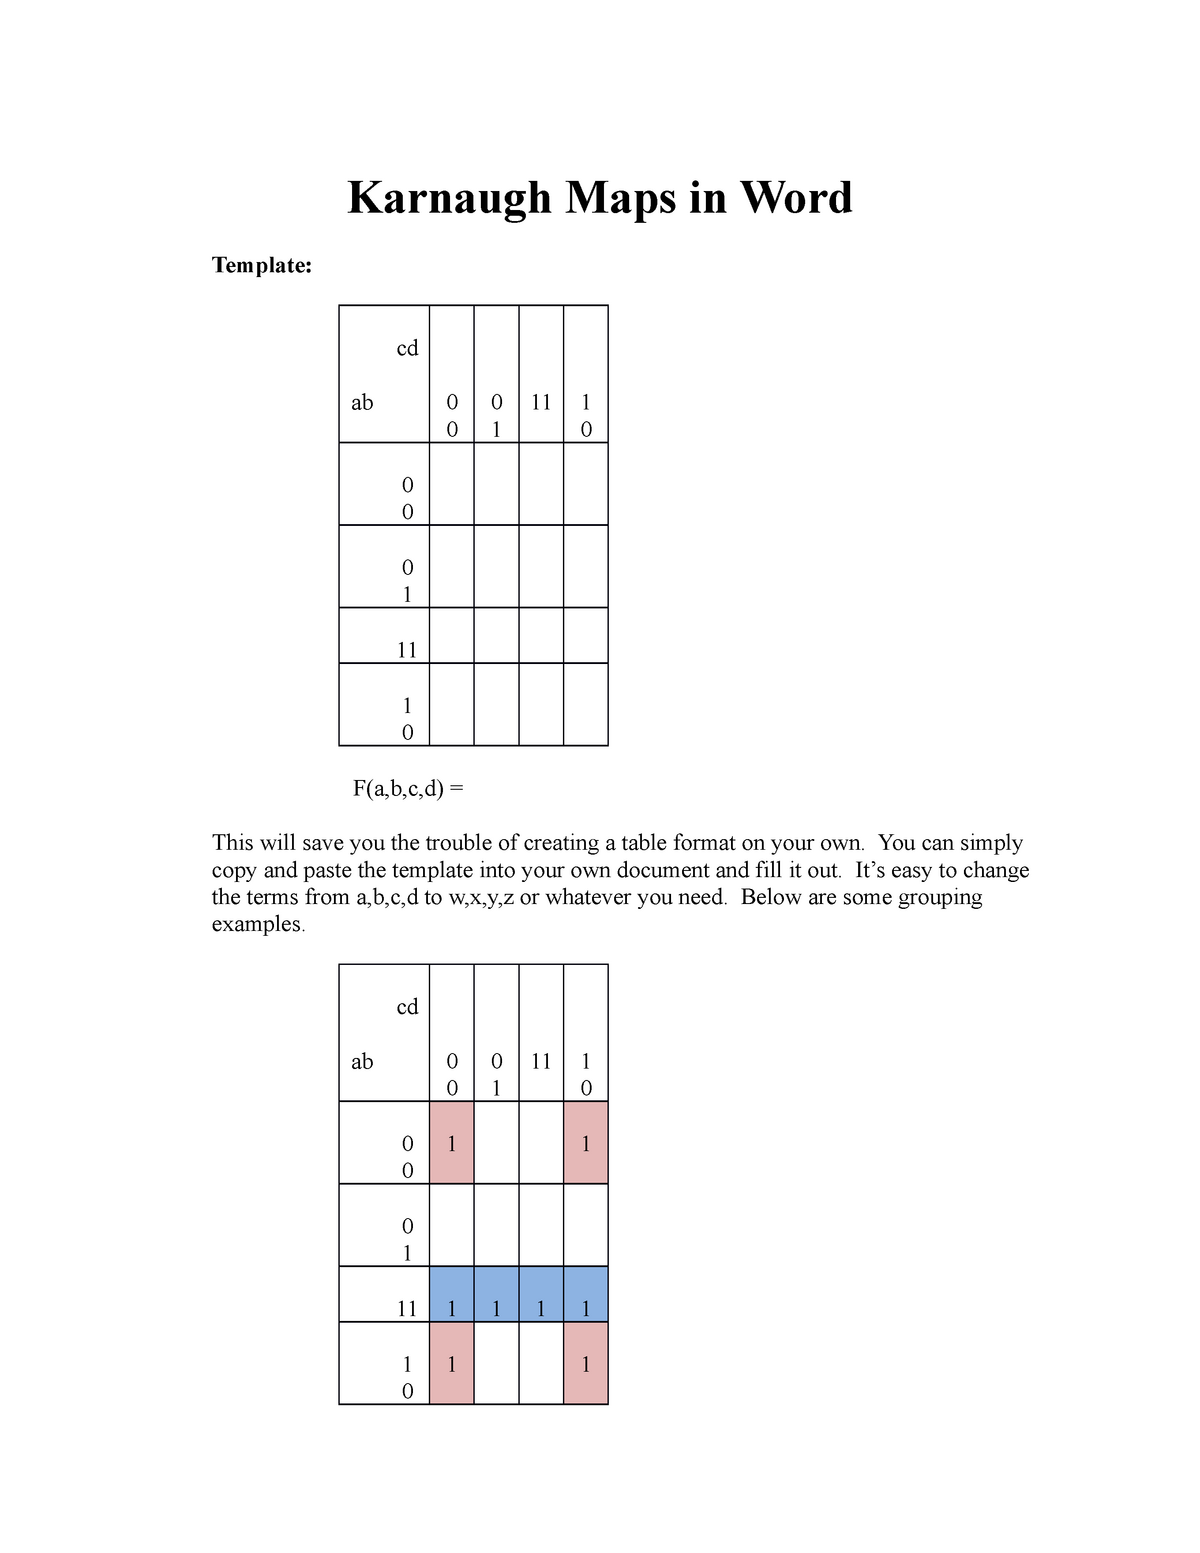 karnaugh-map-template-lecture-notes-all-karnaugh-maps-in-word